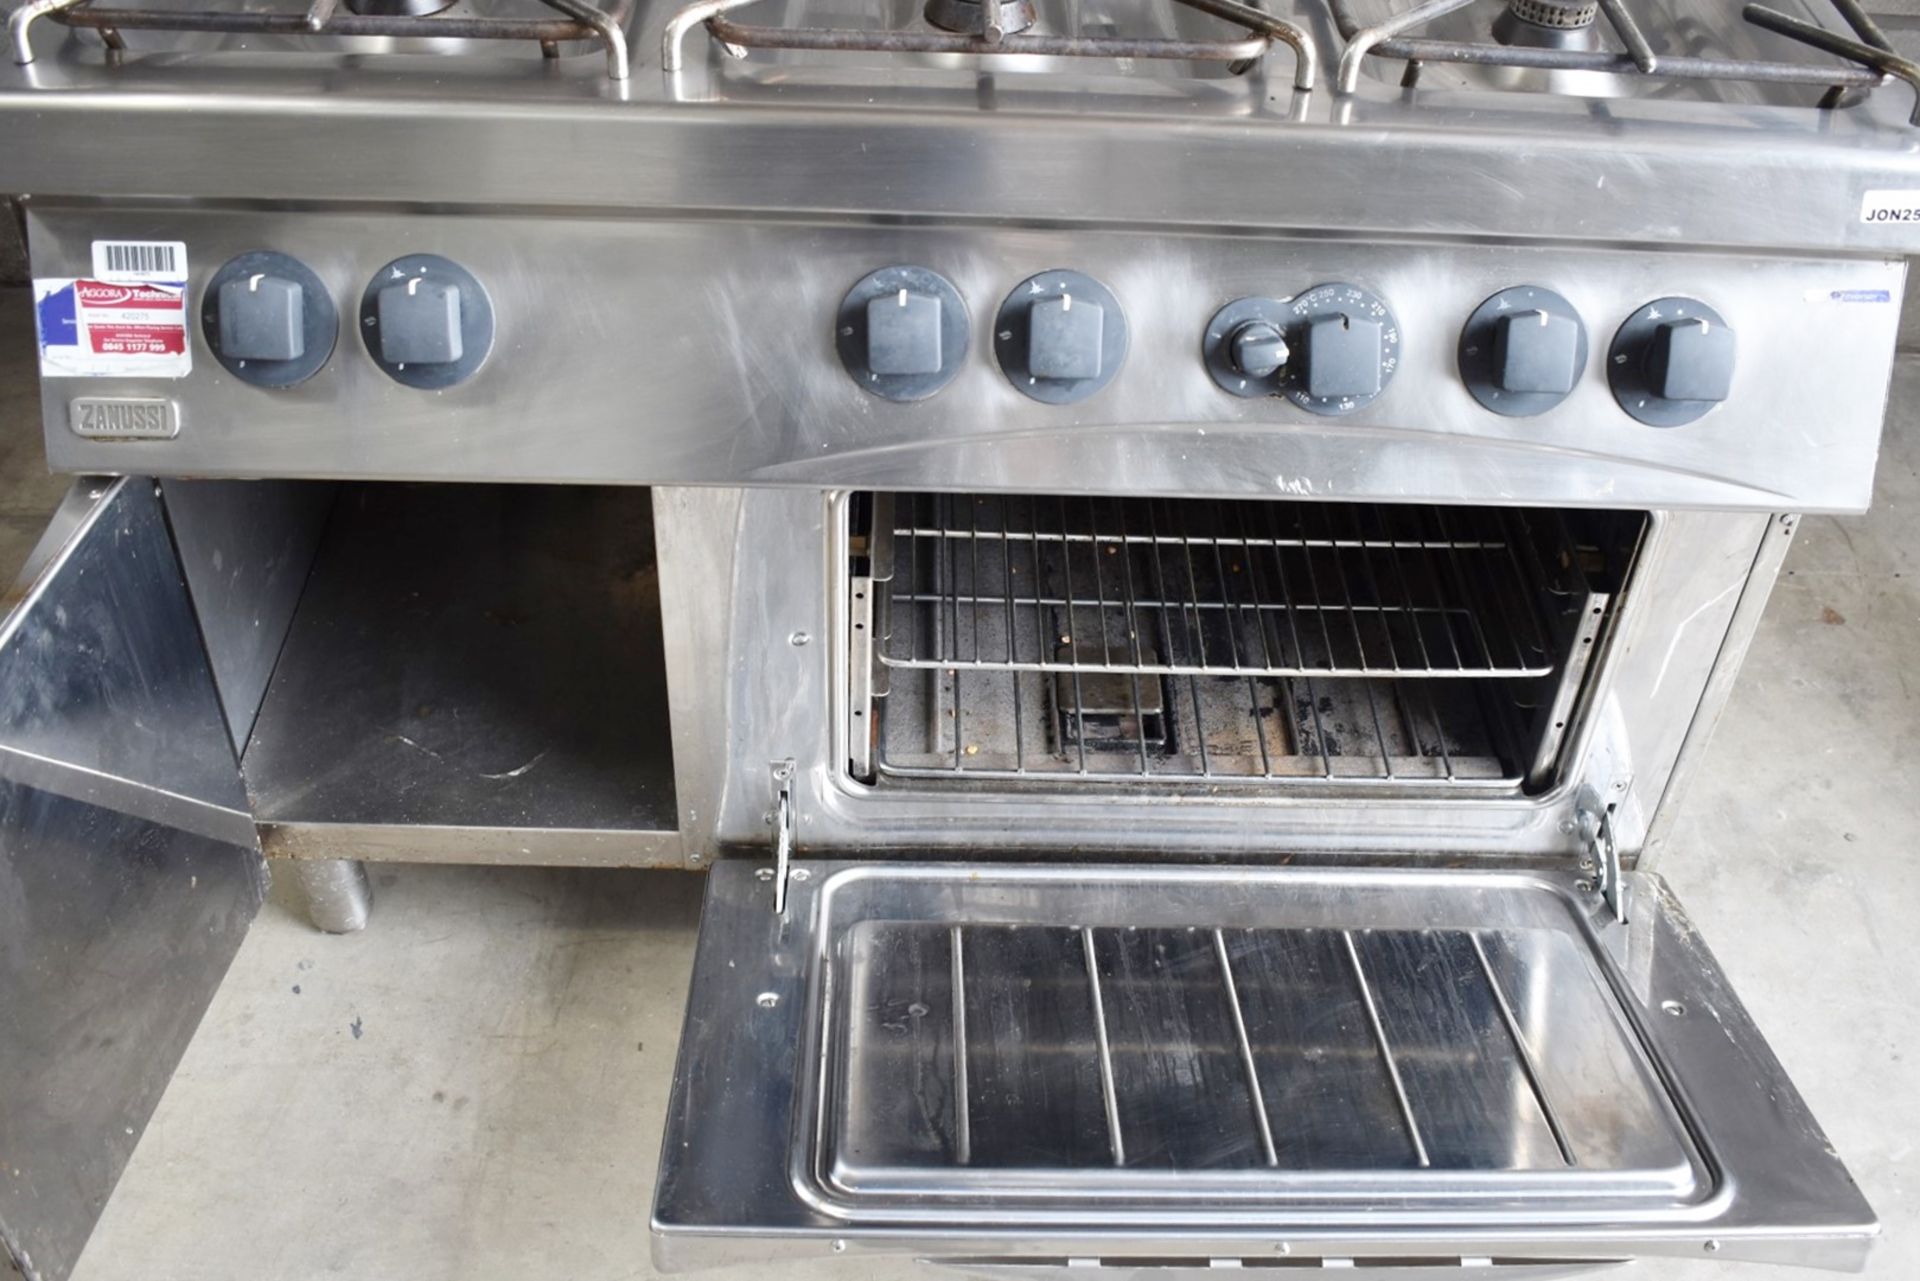 1 x Zanussi 6 Burner Gas Range Cooker with a Stainless Steel Exterior - Image 14 of 18